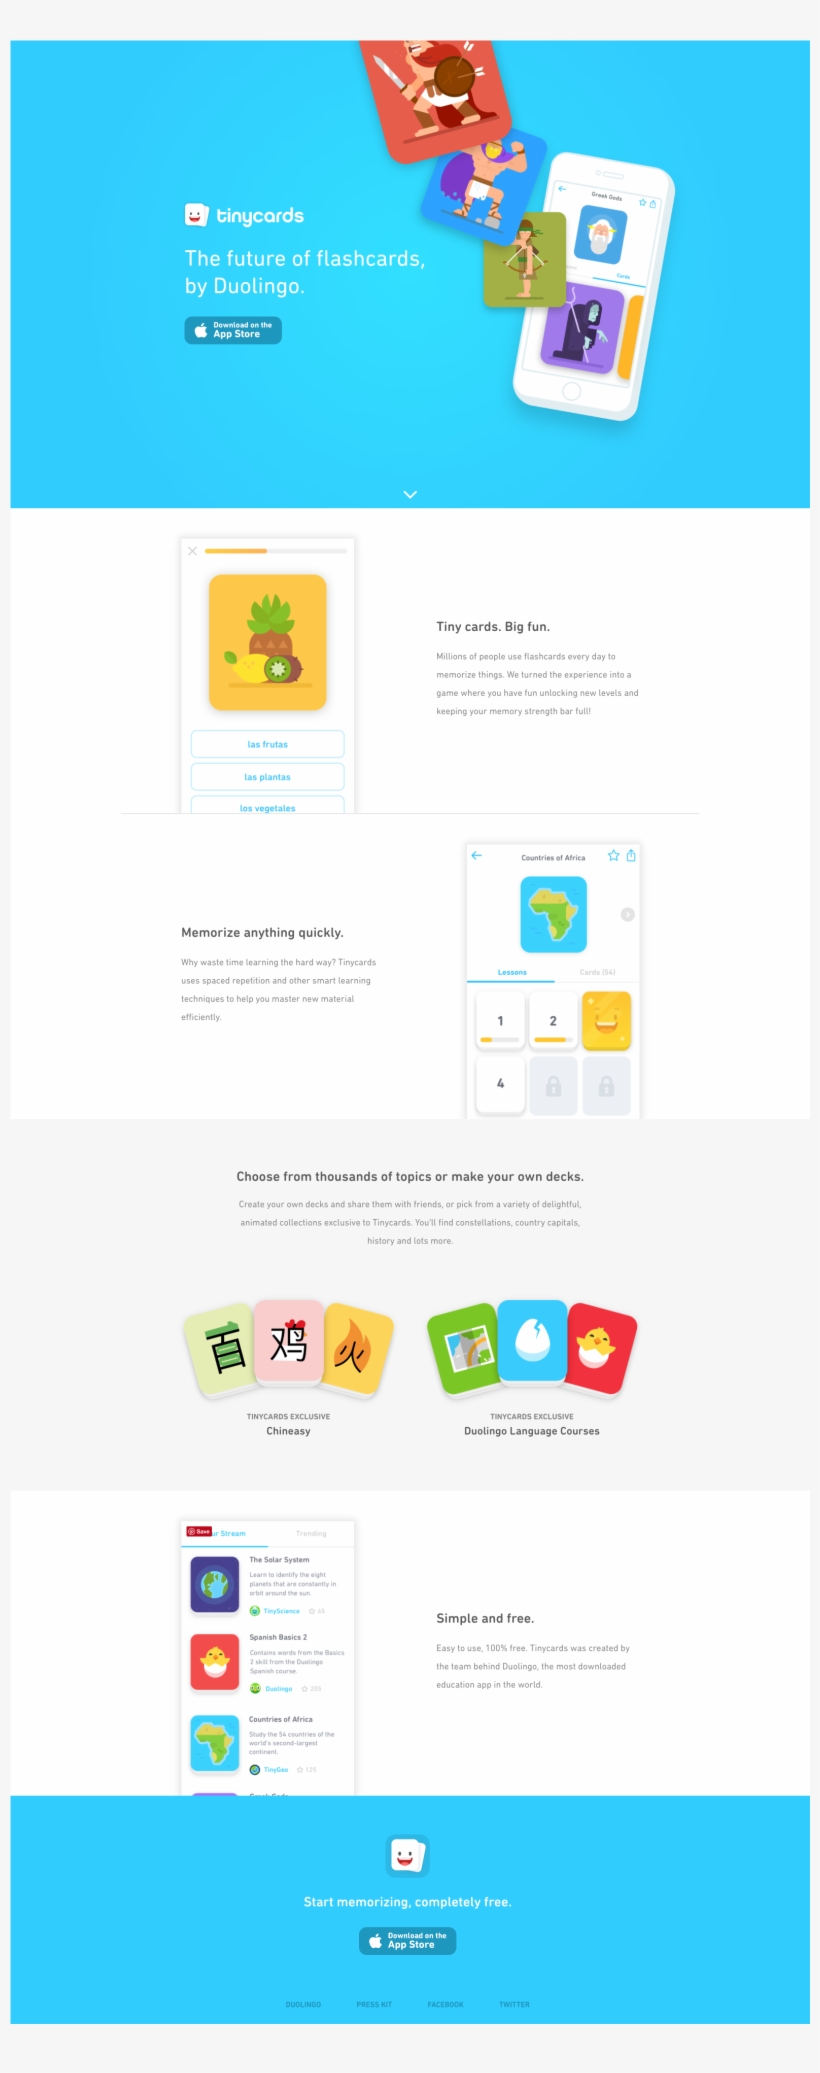 Https - //tinycards - Duolingo - Com/ Easy To Understand, - Landing Page, transparent png #6088601